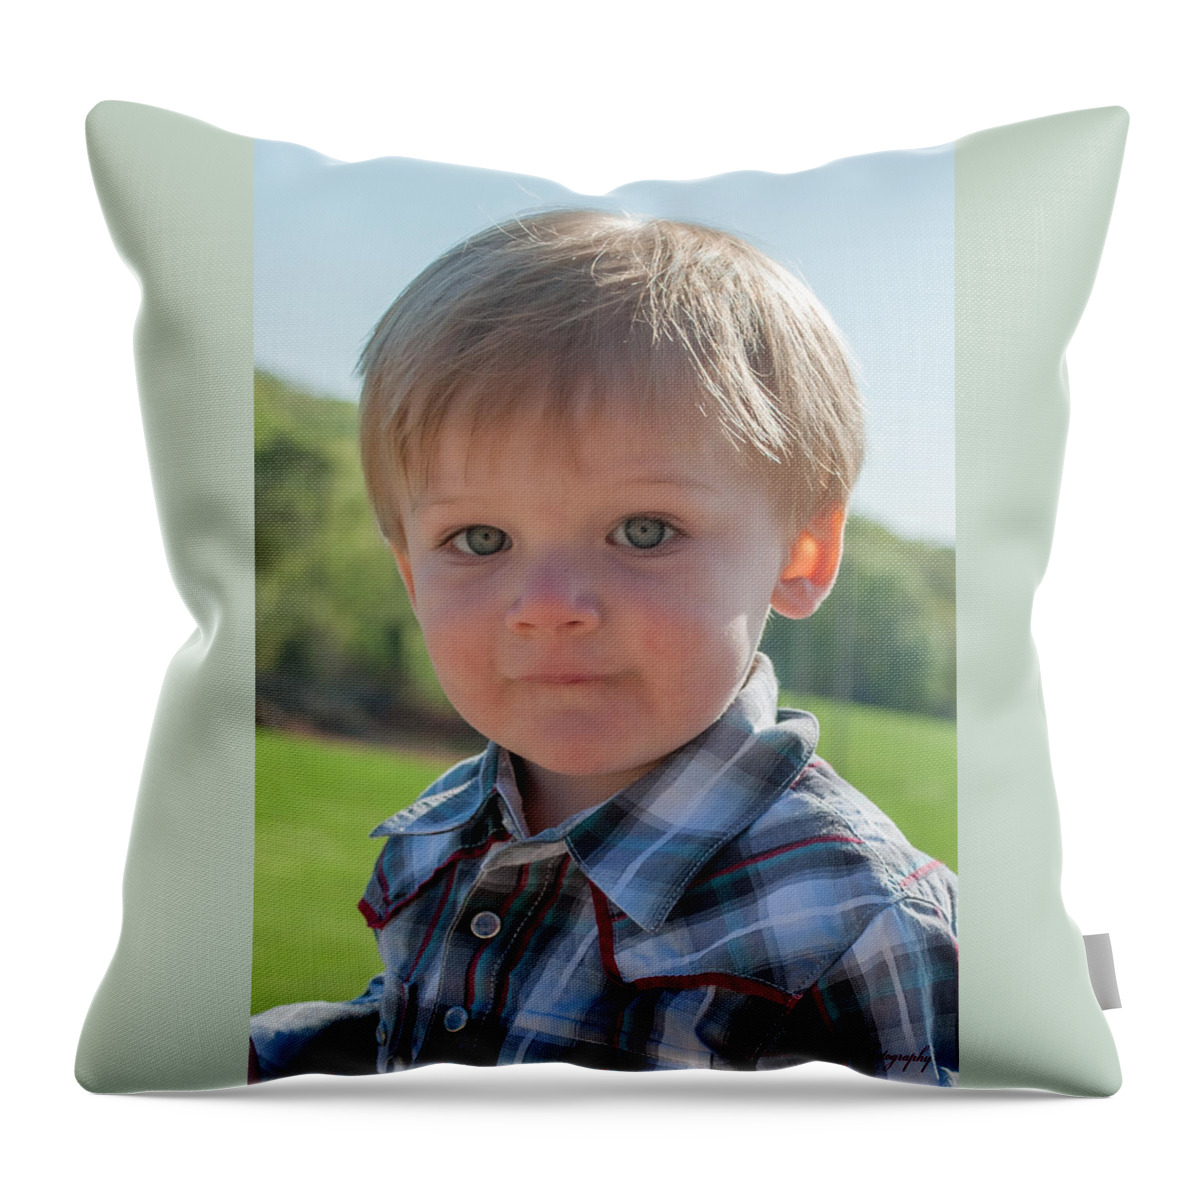  Throw Pillow featuring the photograph Wyatt Portrait 1 by Photos By Cassandra